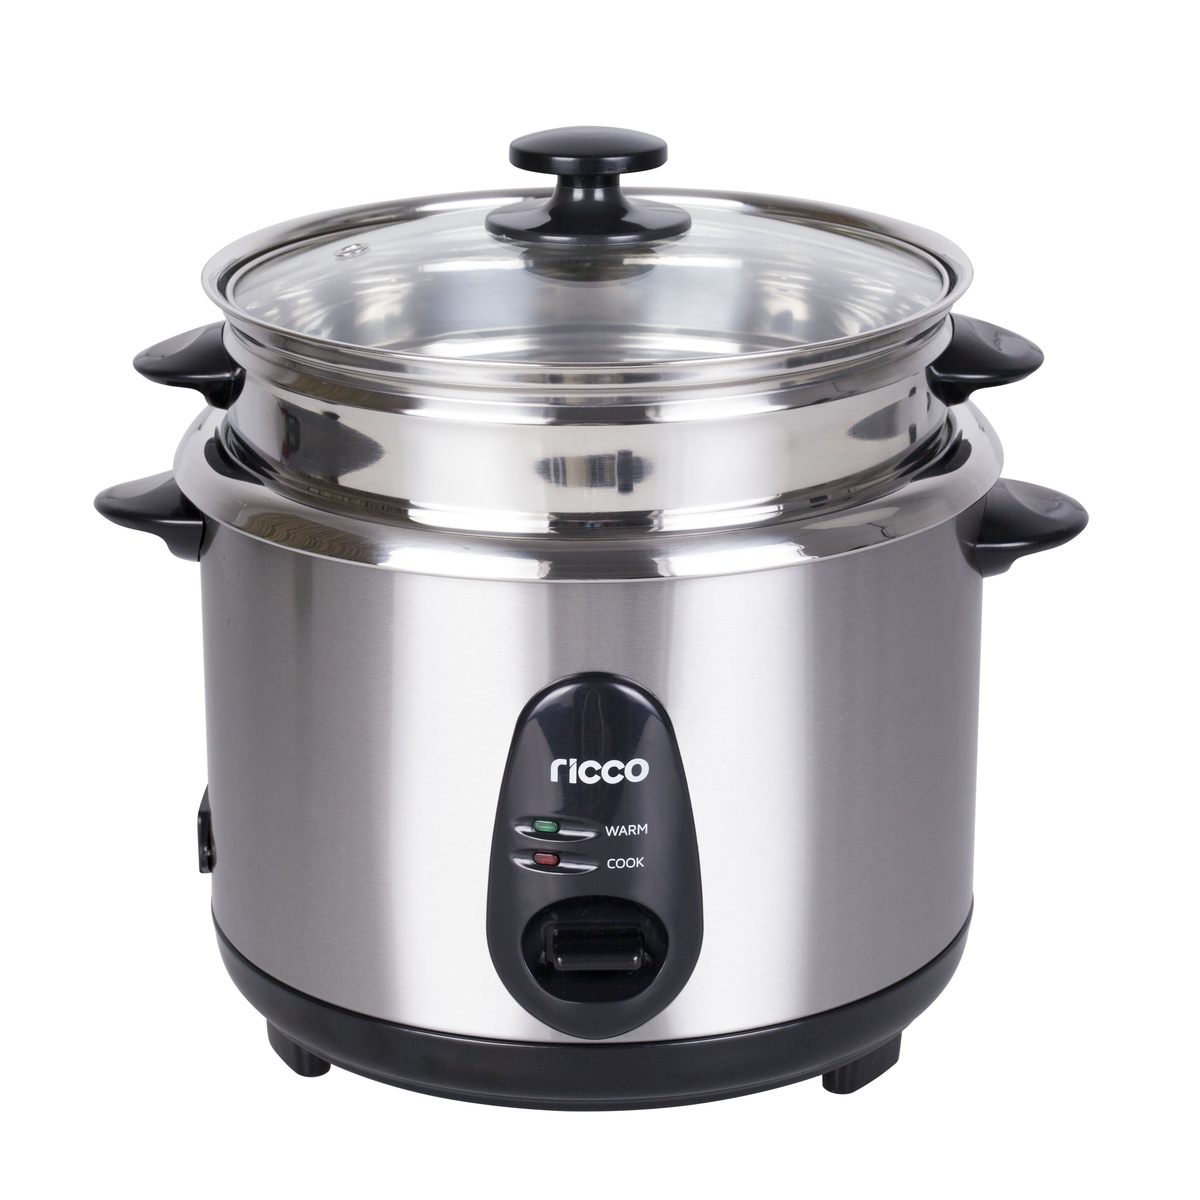 15 Incredible Electric Stainless Steel Rice Cooker For 2023